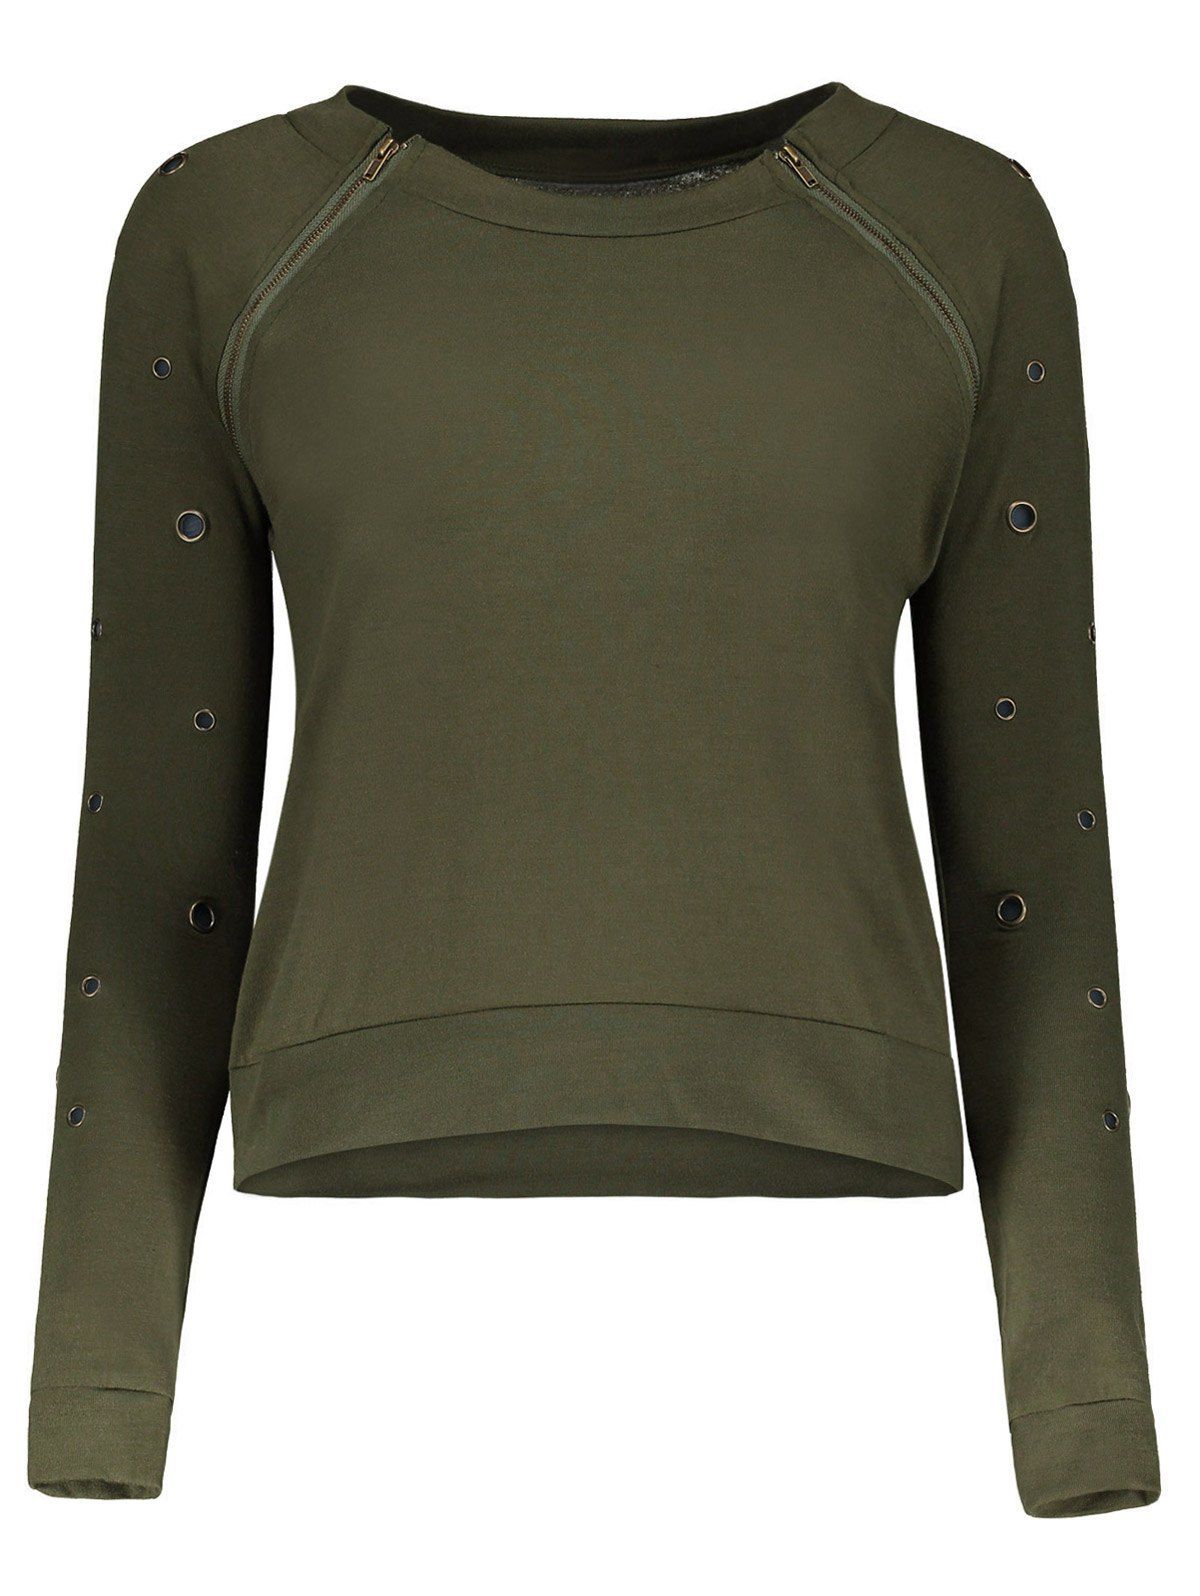 Stylish Scoop Neck Long Sleeve Army Green Hole Design Women's T-Shirt - ARMY GREEN L